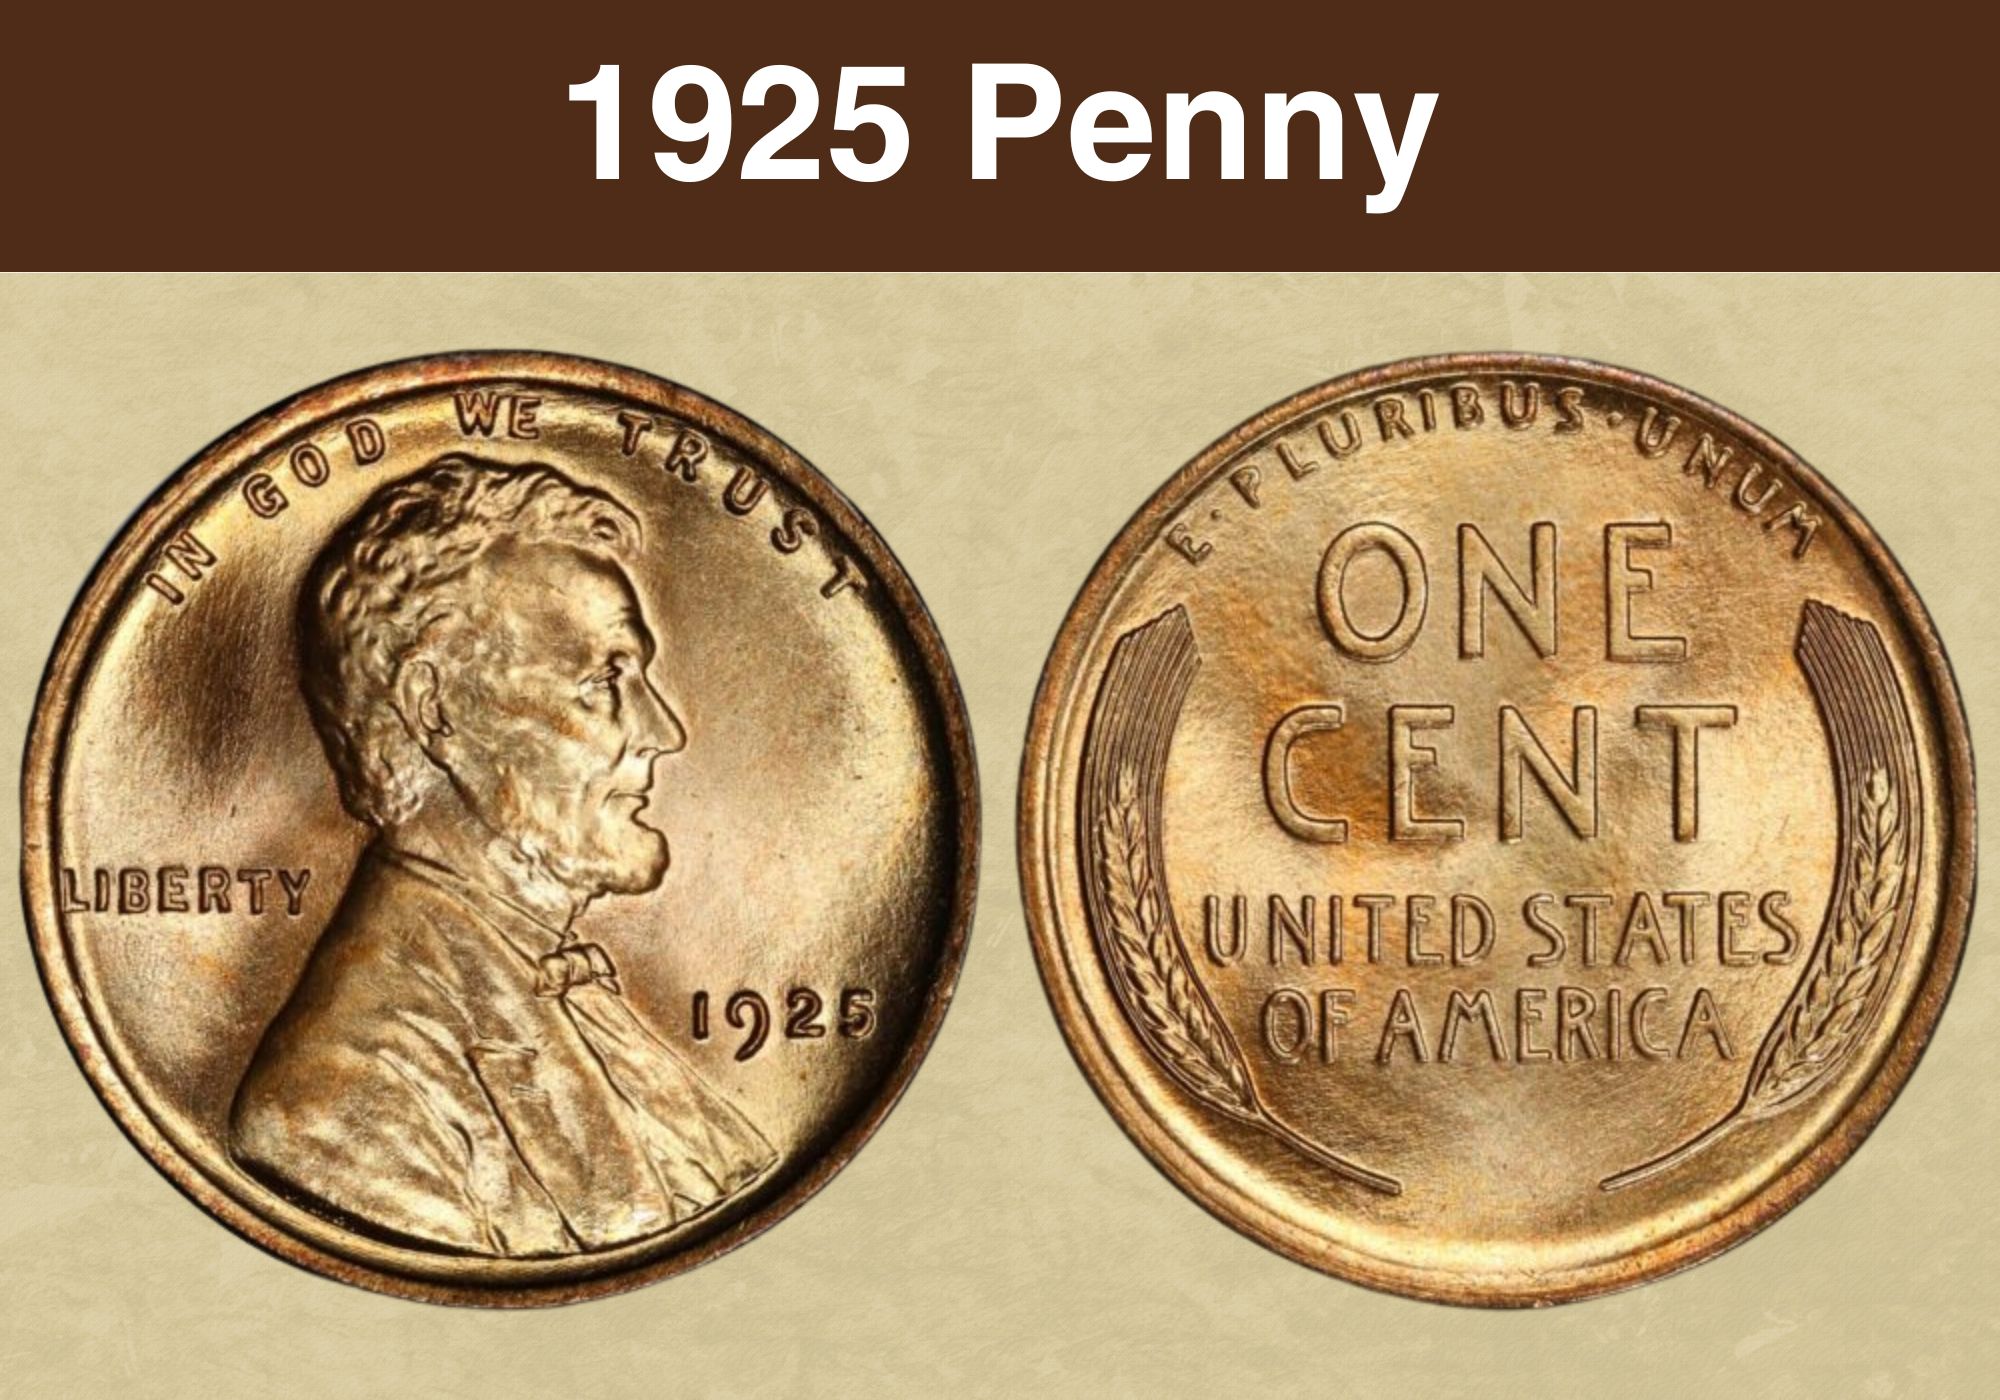 2021 Lincoln Shield Penny Coin Value Prices, Photos & Info